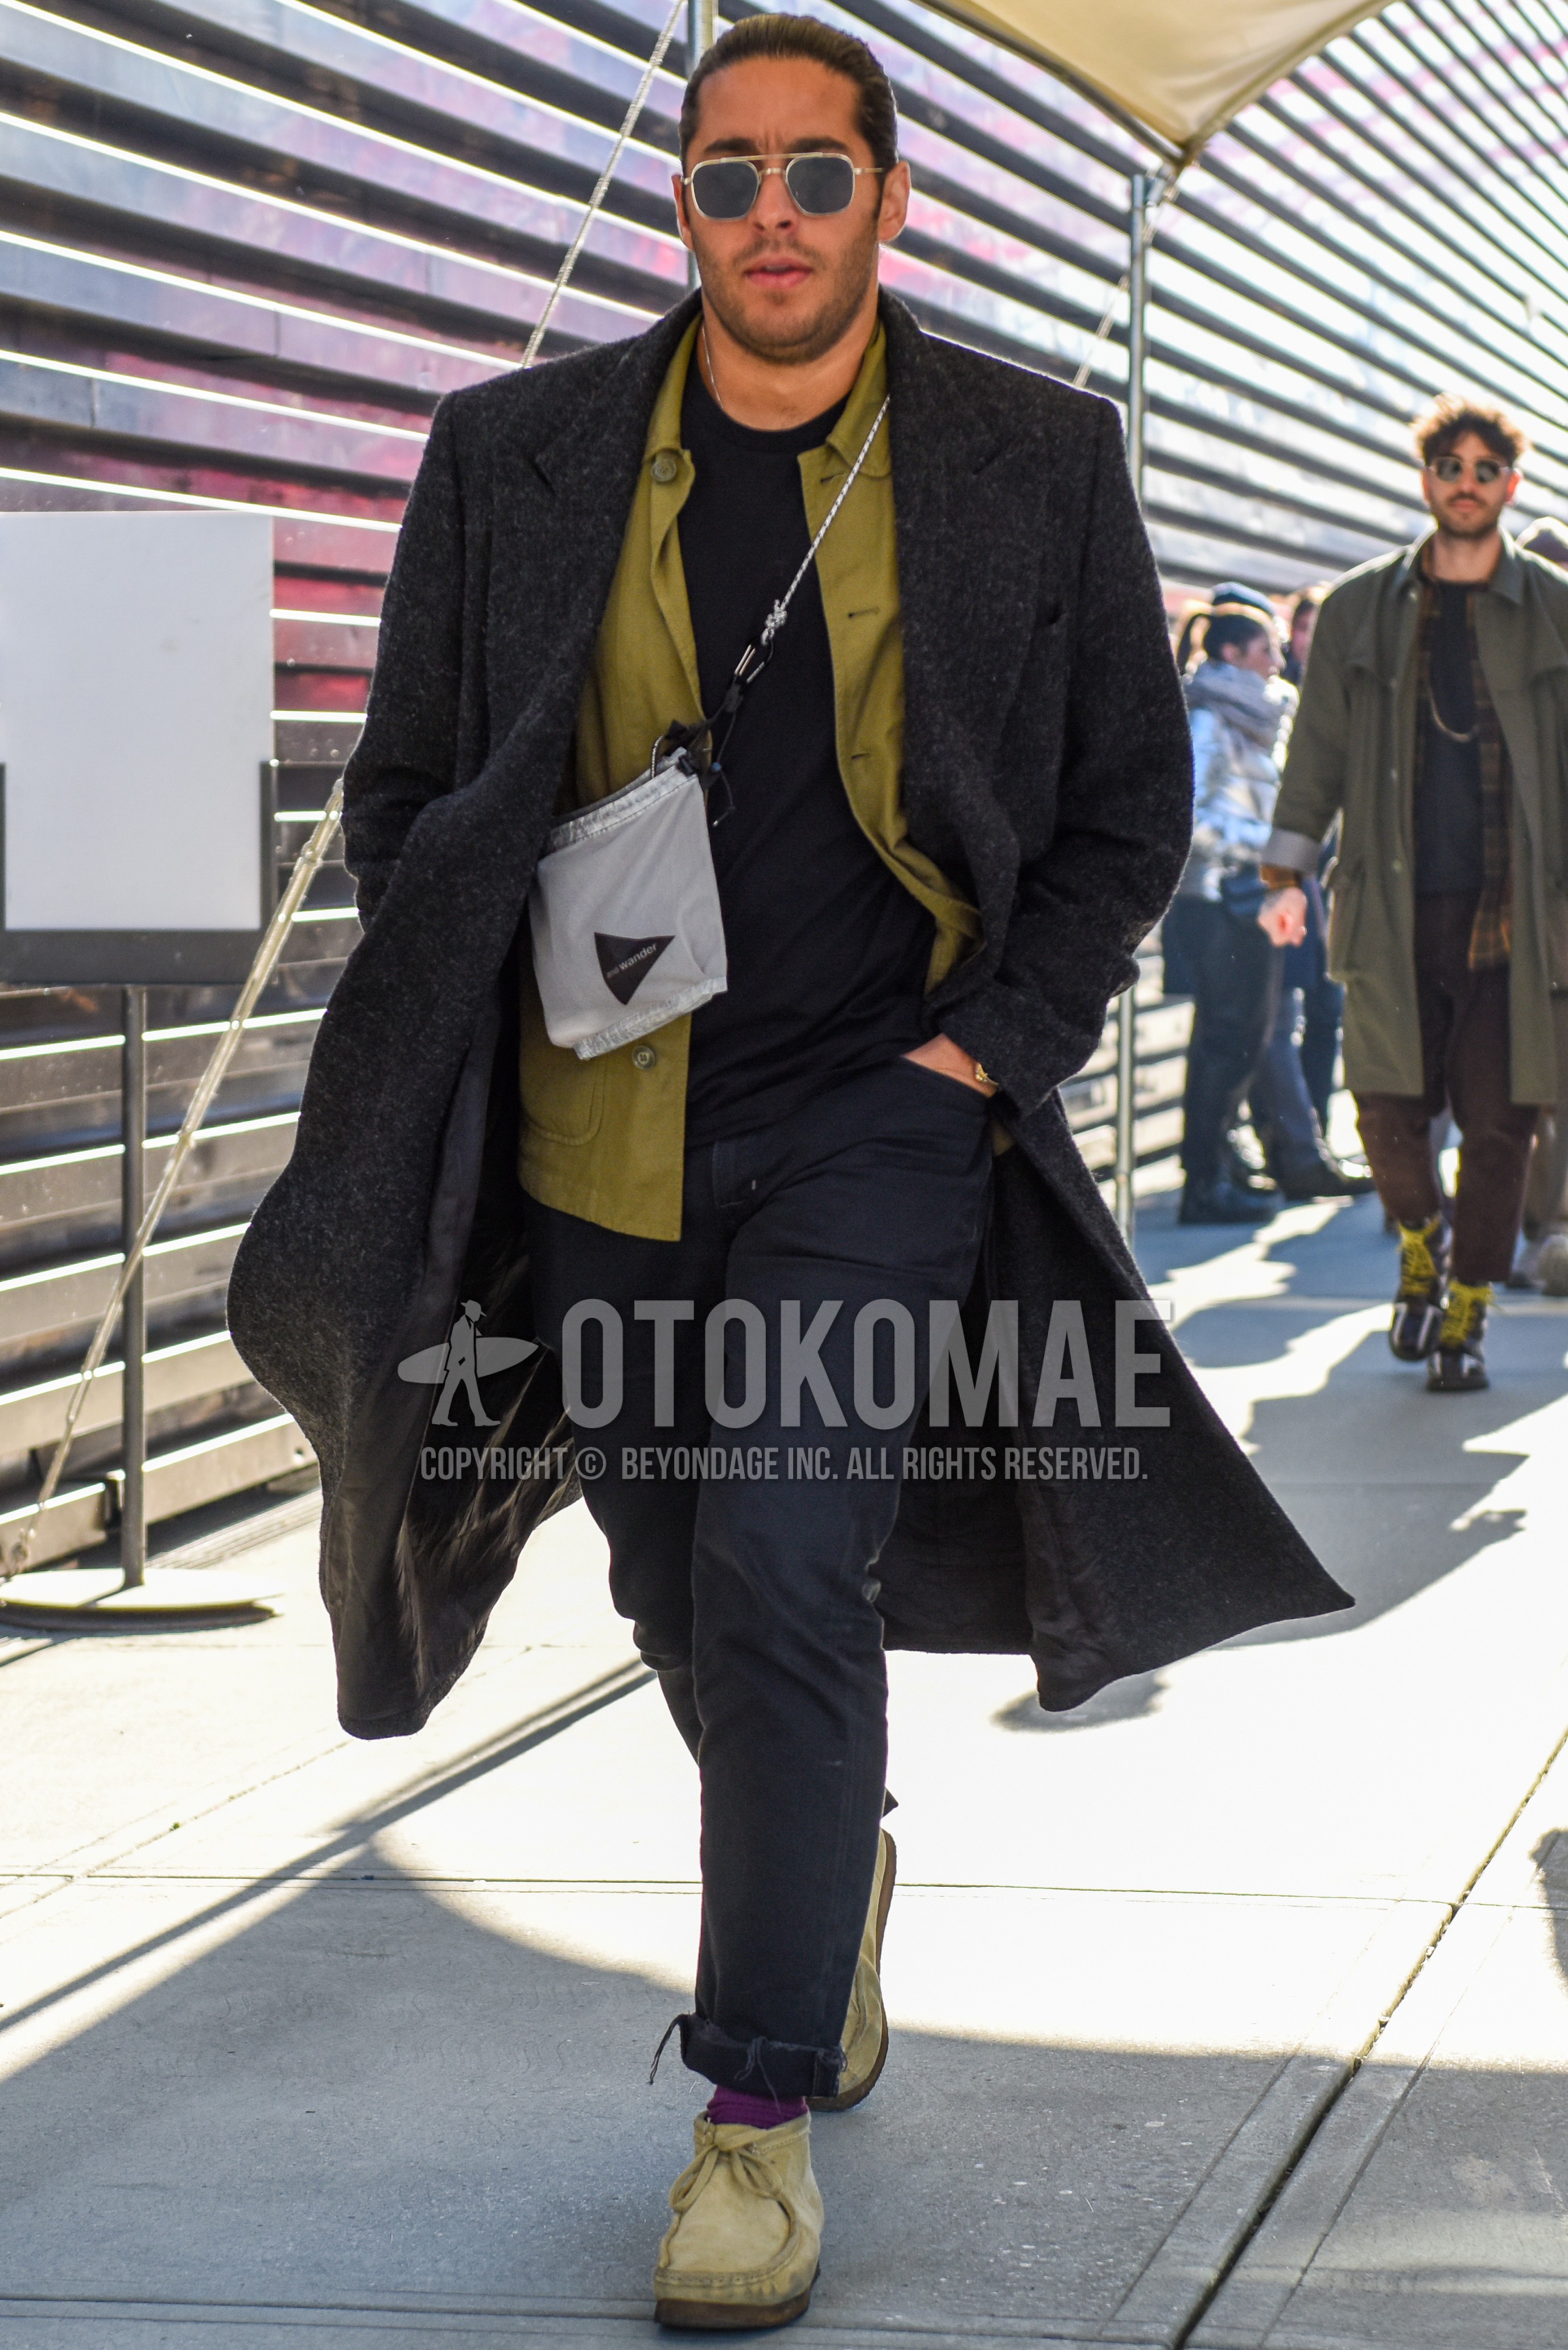 Men's autumn winter outfit with silver plain sunglasses, gray plain chester coat, olive green plain shirt jacket, black plain t-shirt, black plain denim/jeans, purple plain socks, beige chukka boots, silver one point shoulder bag.